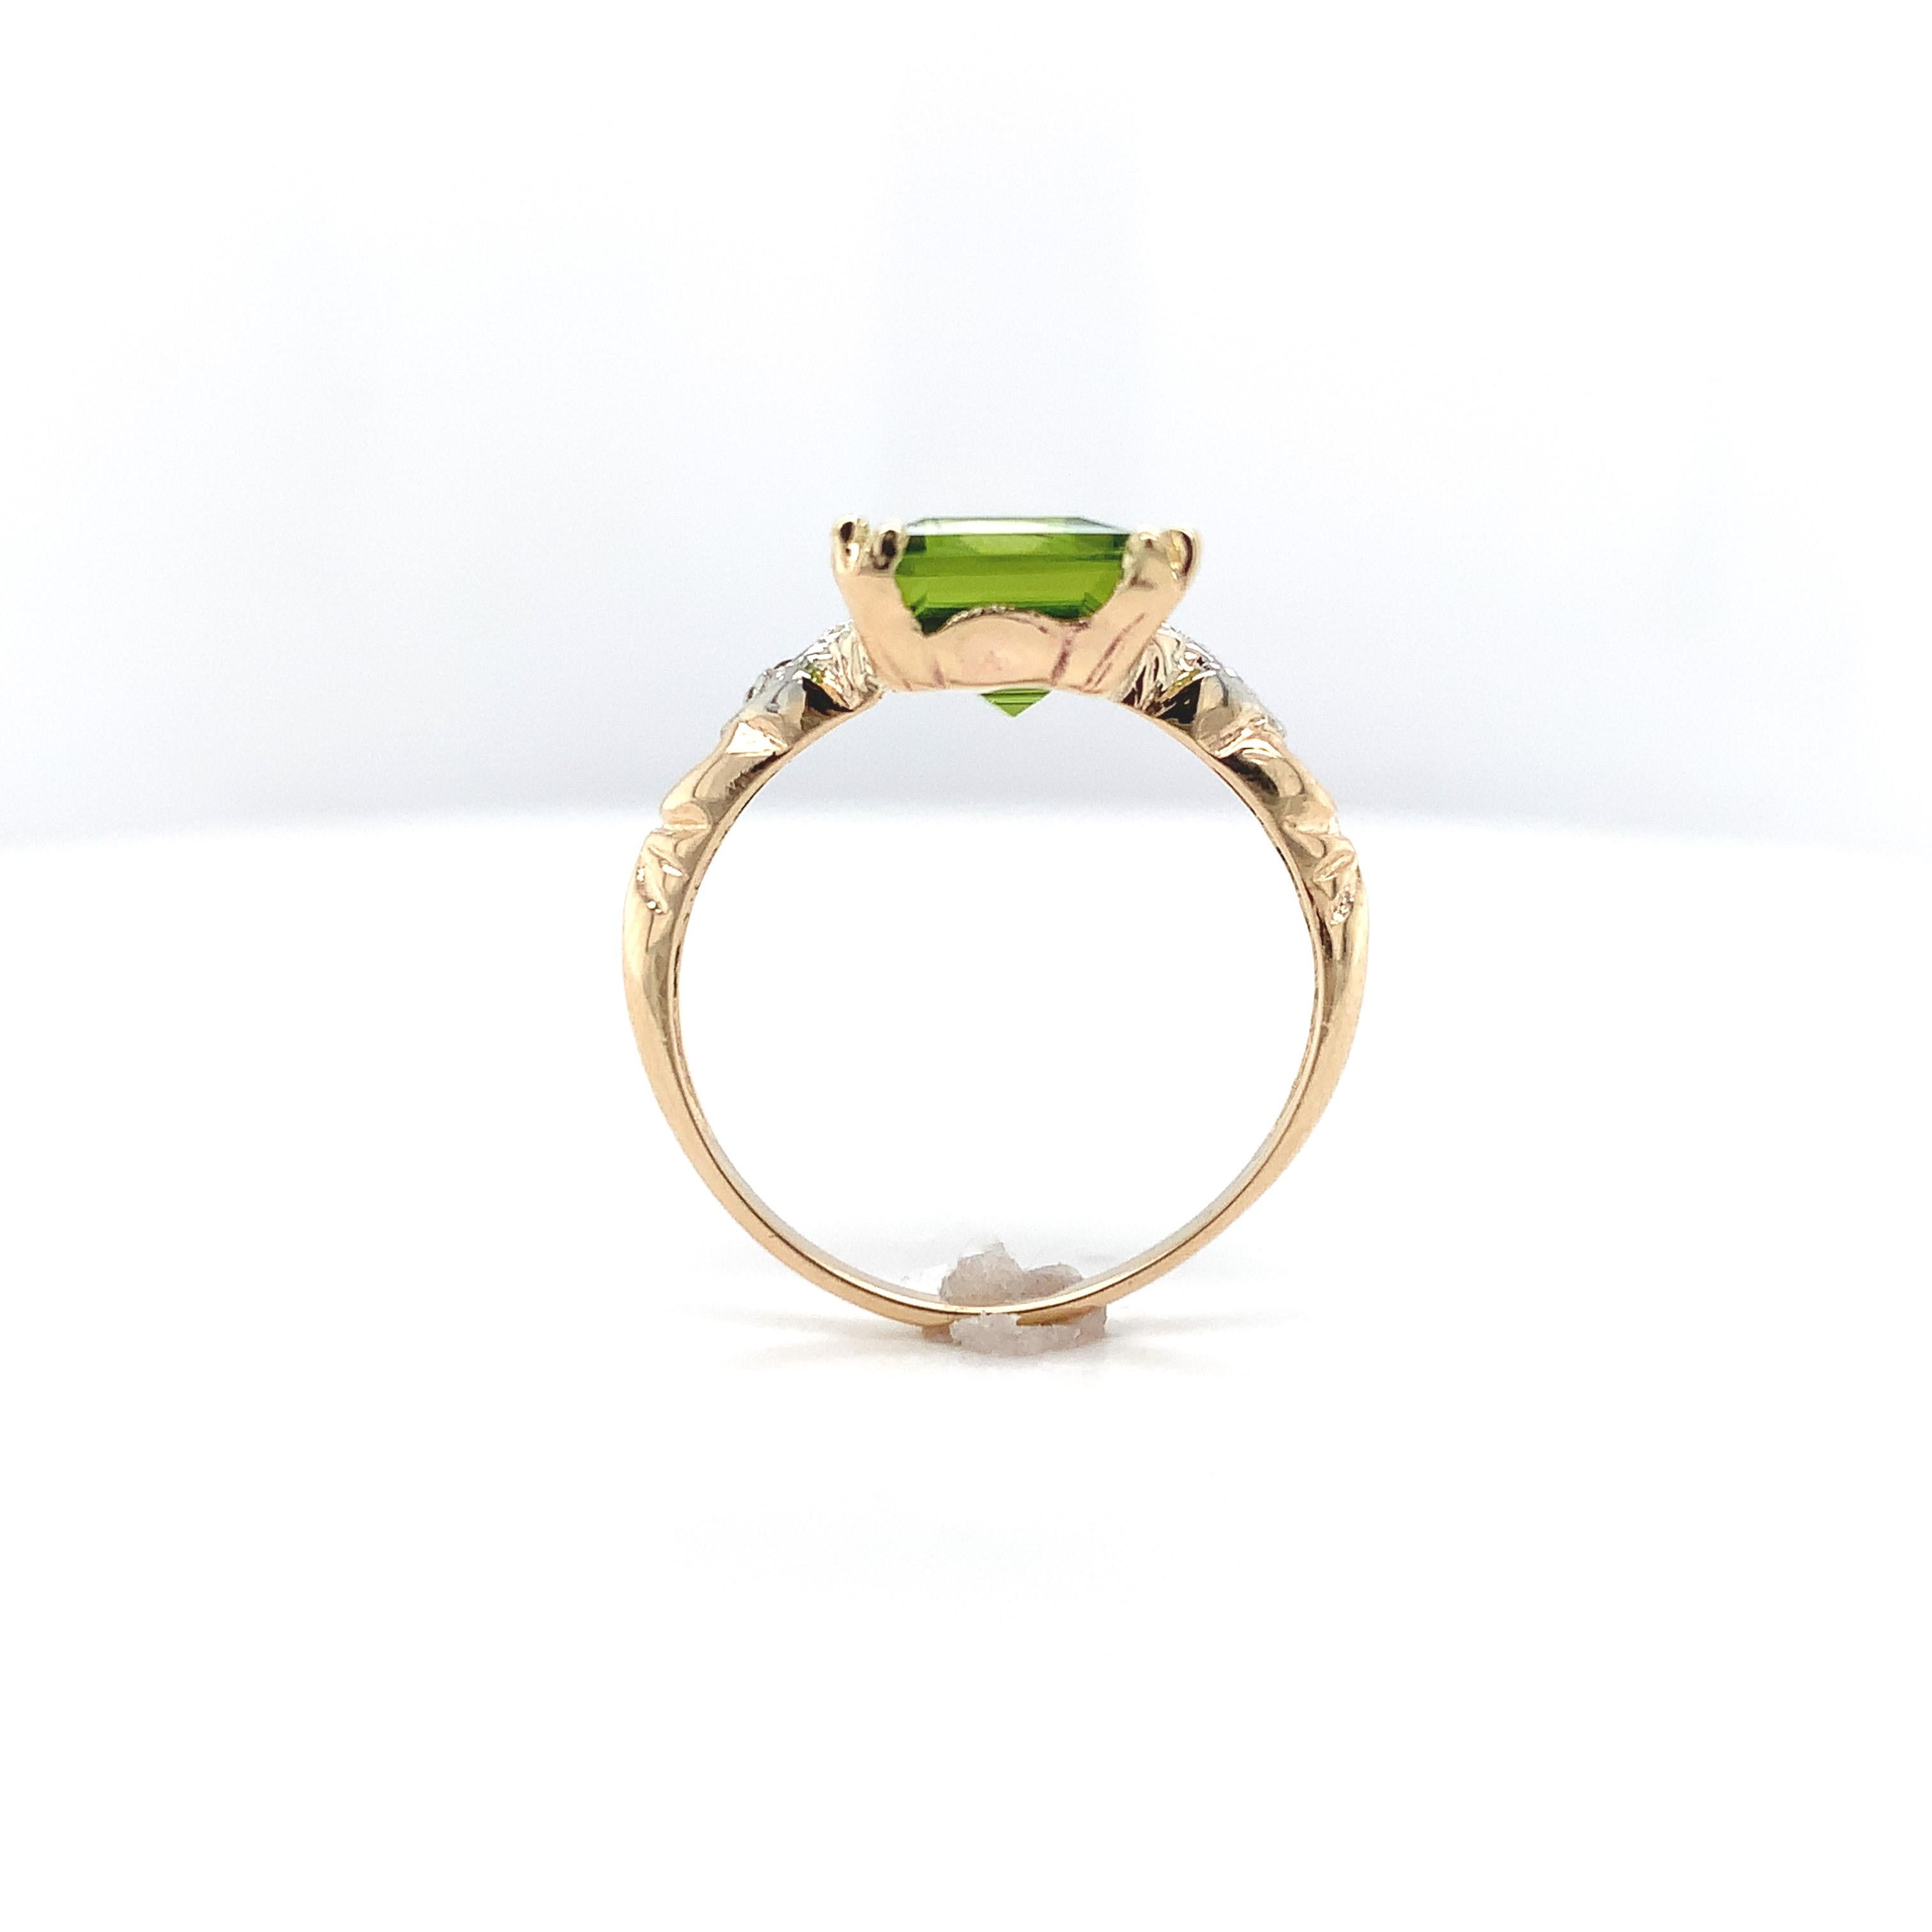 10K yellow gold ring featuring an emerald cut peridot weighing 3.48 carats. The vibrant lime green peridot measures about 10mm x 8mm. There are 2 tiny rose/polki cut diamond accents set in white gold. The ring fits a size 6.25 finger, weighs